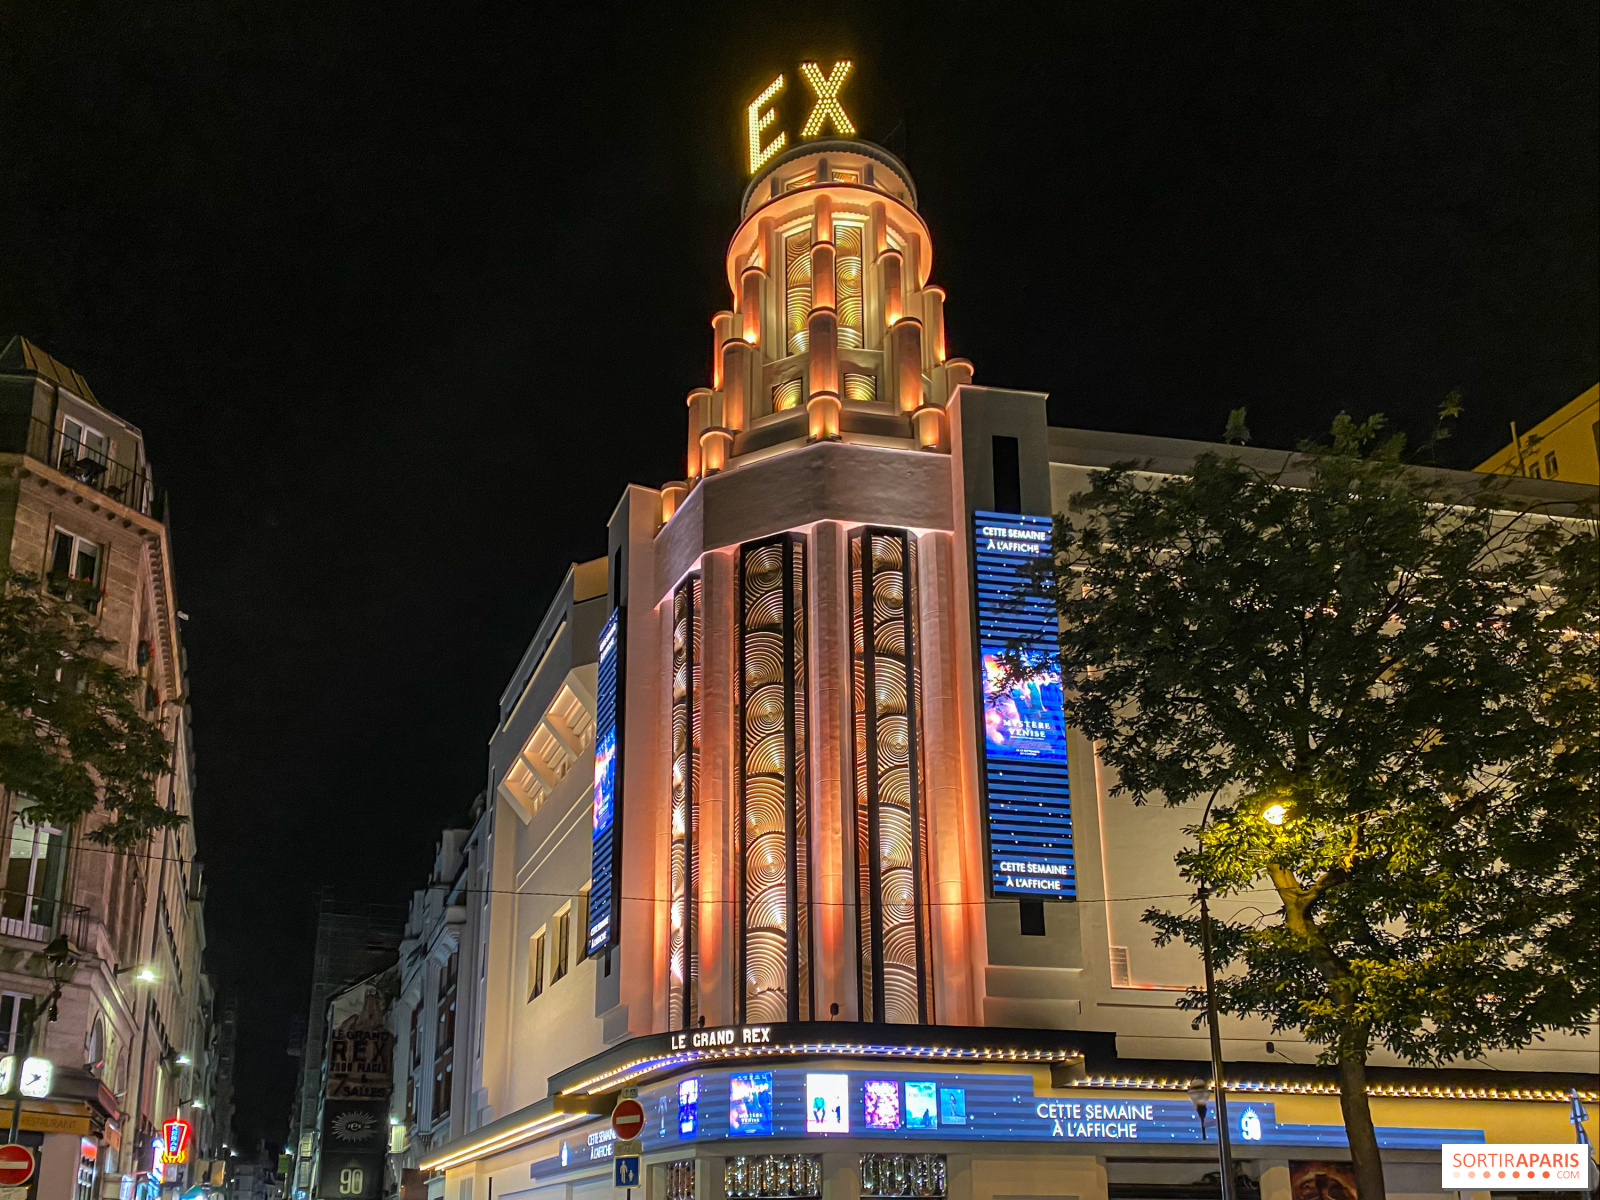 Lord of the Rings and Star Wars marathons in Grand Rex this winter: the dates